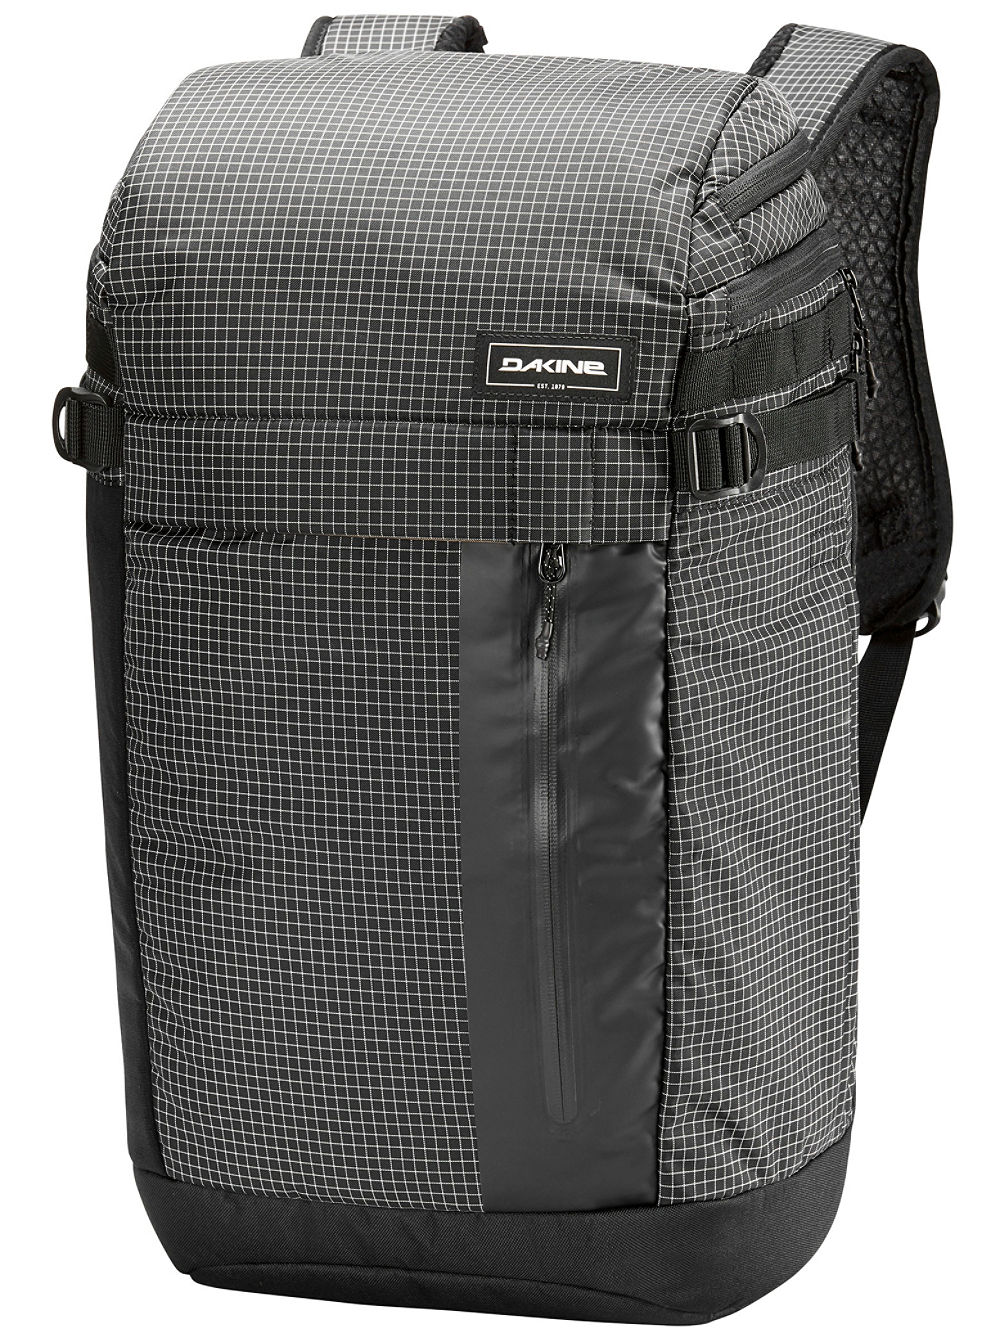 Concourse 30L Backpack